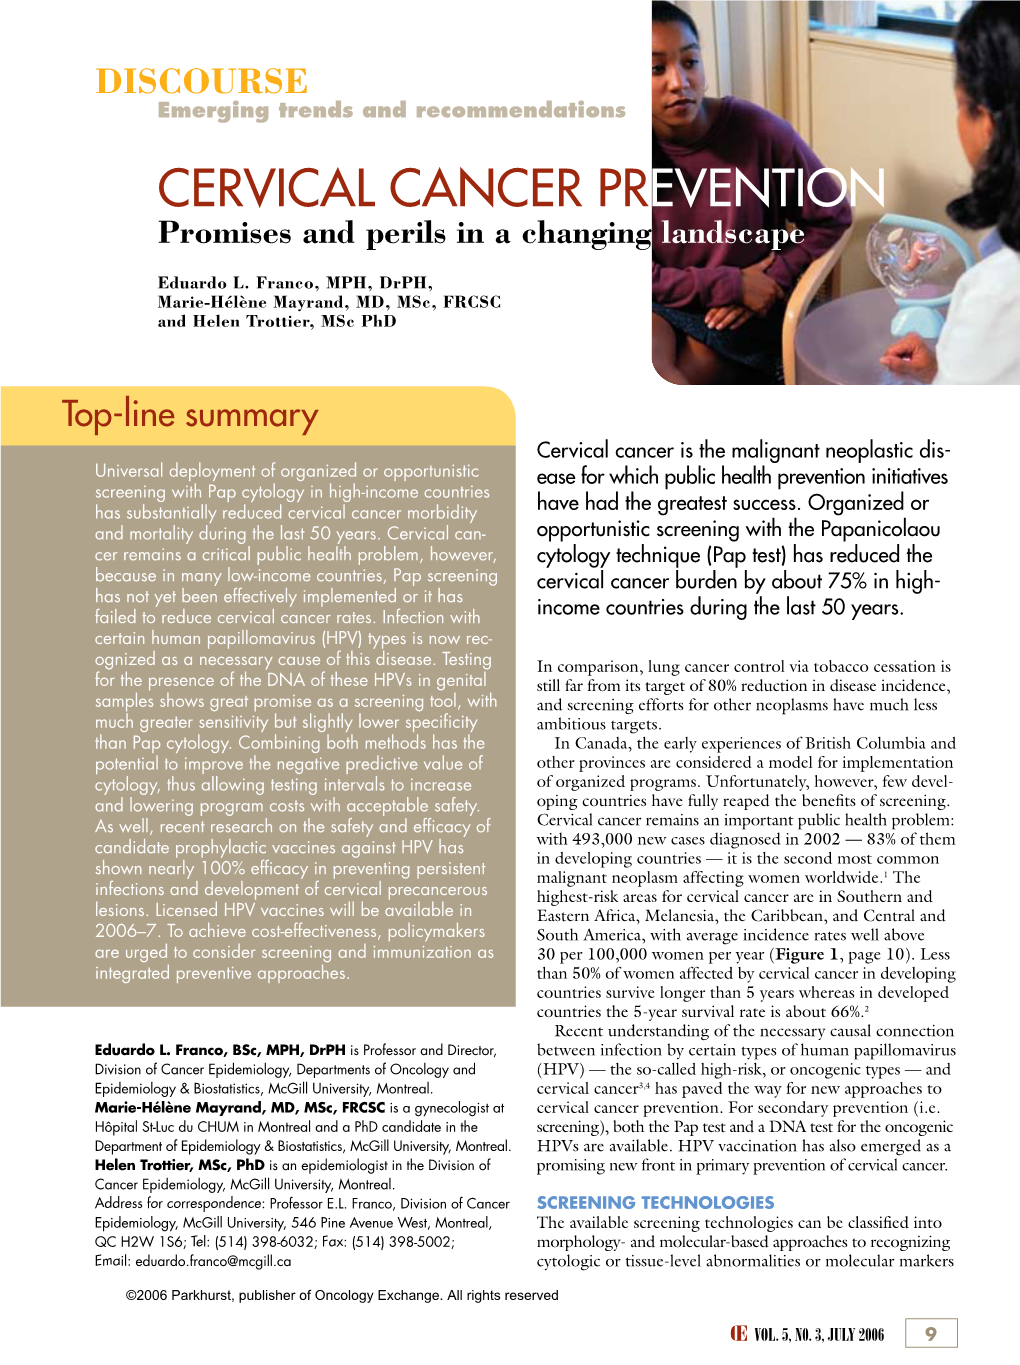 Cervical Cancer Prevention Promises and Perils in a Changing Landscape